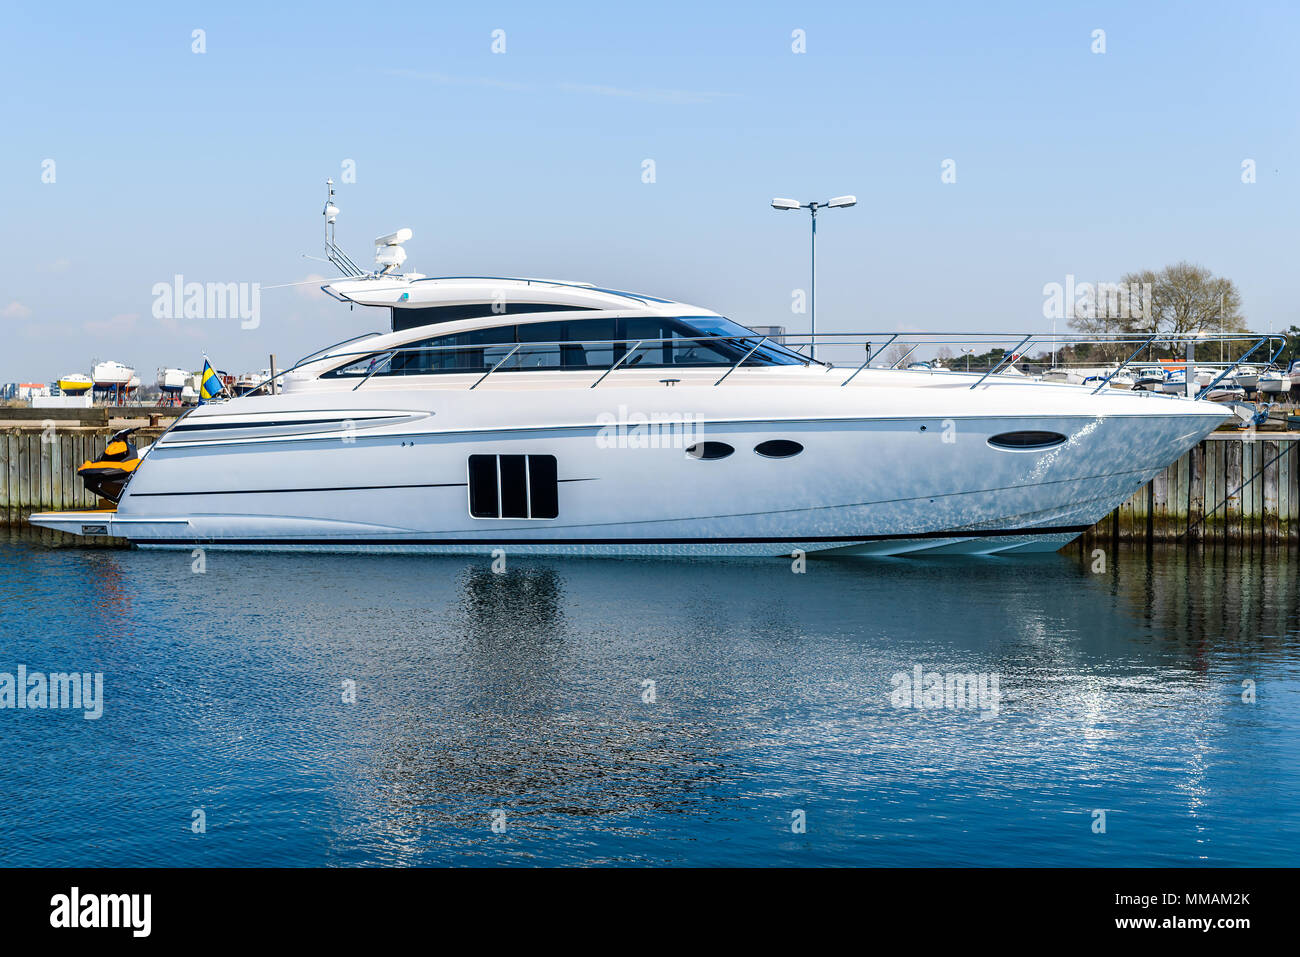 Luxurious motorboat tied to a pier. Logos and id removed. Stock Photo